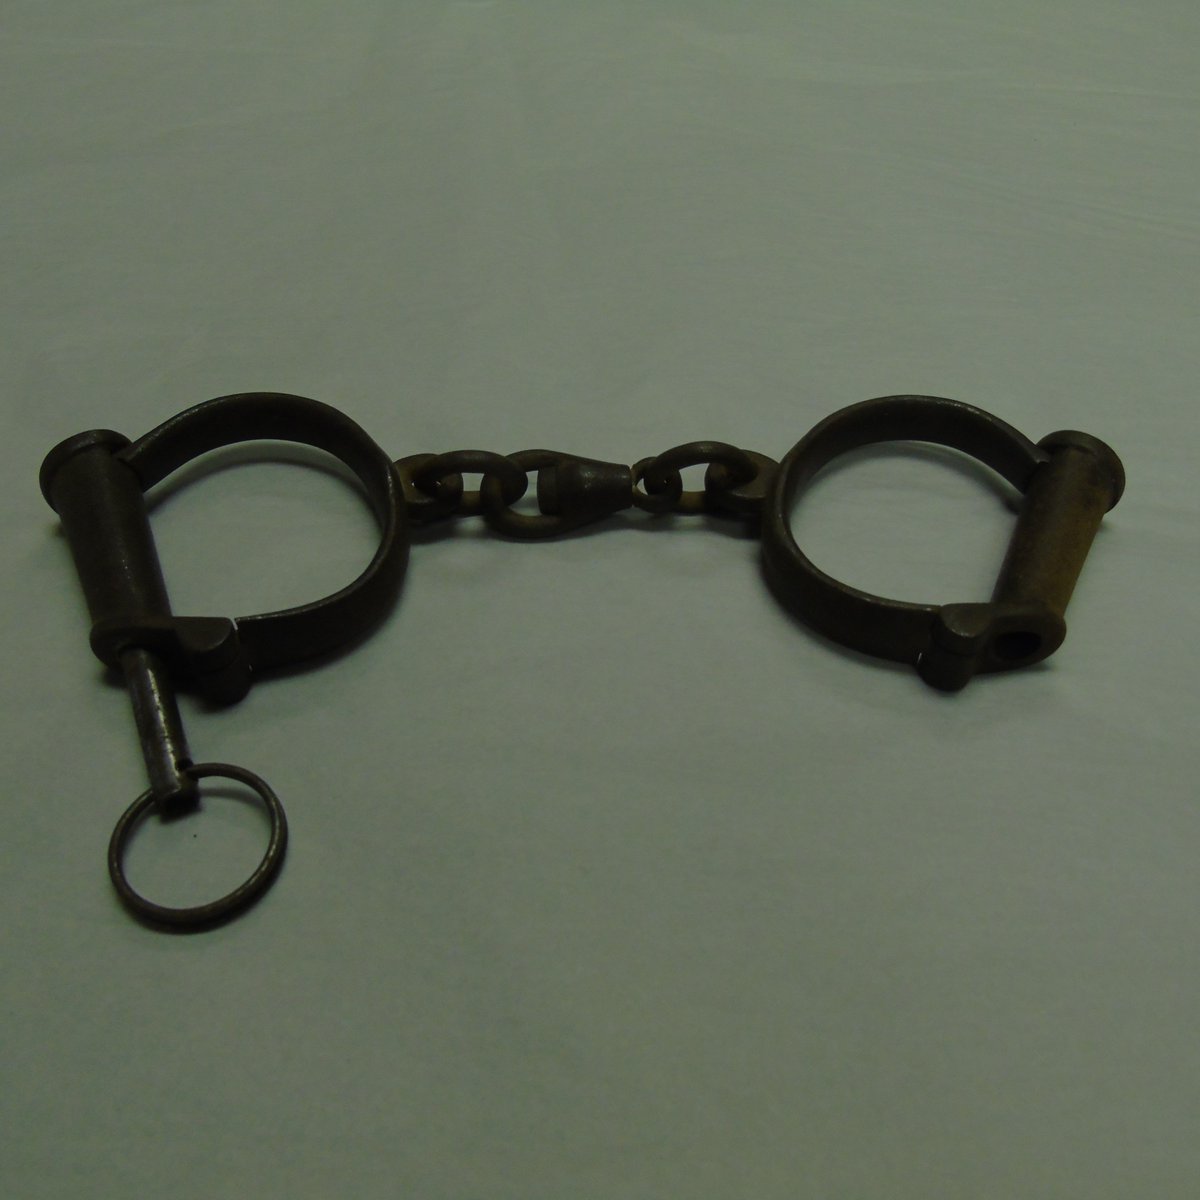 These handcuffs were worn by Dr Hans Hers. Arrested in 1940 while attempting to help a Dutch agent escape to England, he ended up in Sachsenhausen concentration camp working in the infirmary. After the camp’s liberation, Dr Hers stayed to look after the sick for another 4 months